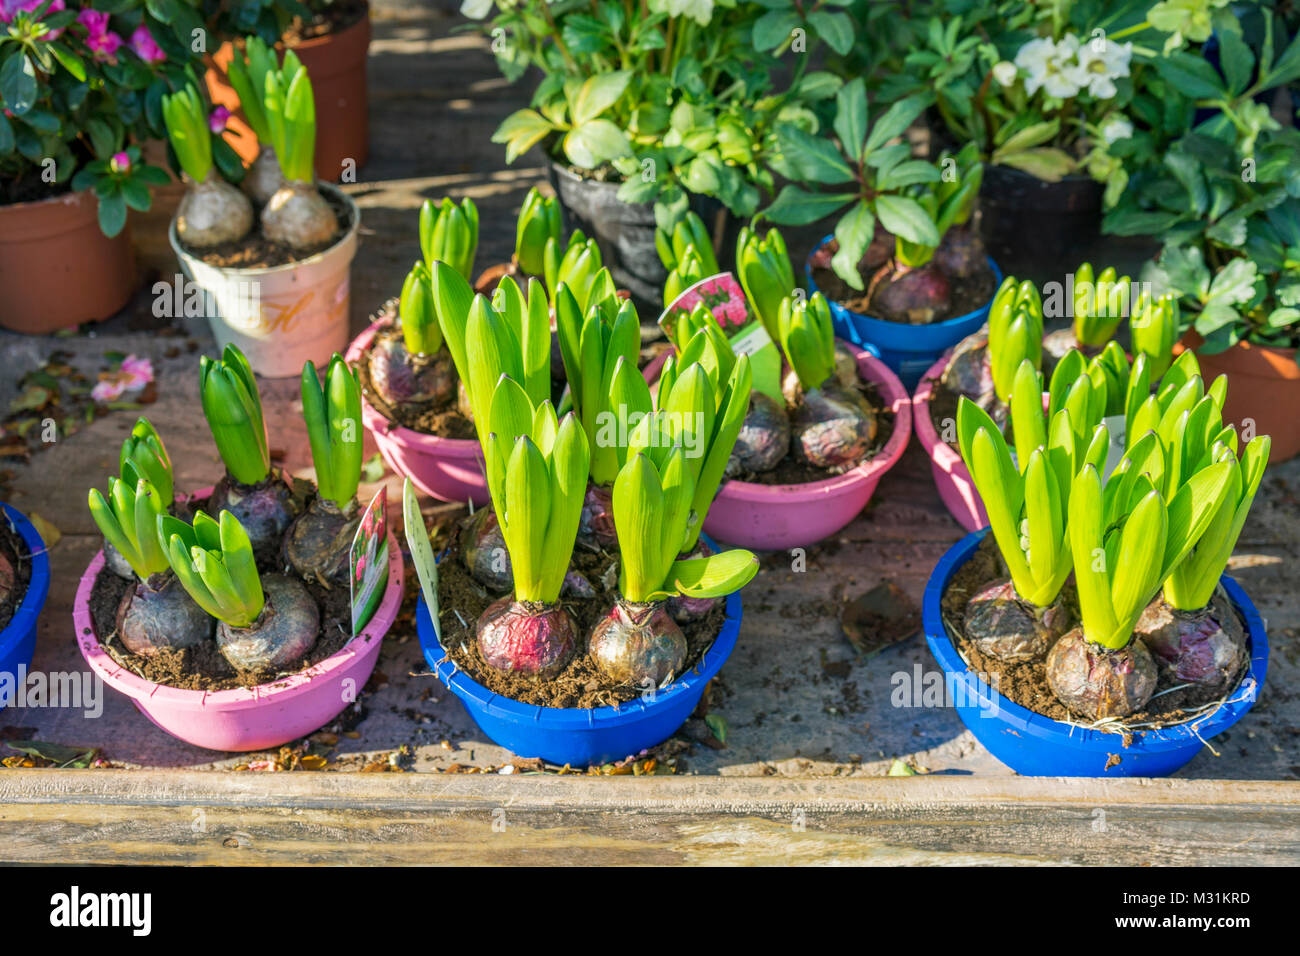 Hyacinth plants (Hyacinthus) before flowering placed in brightly coloured pots Stock Photo